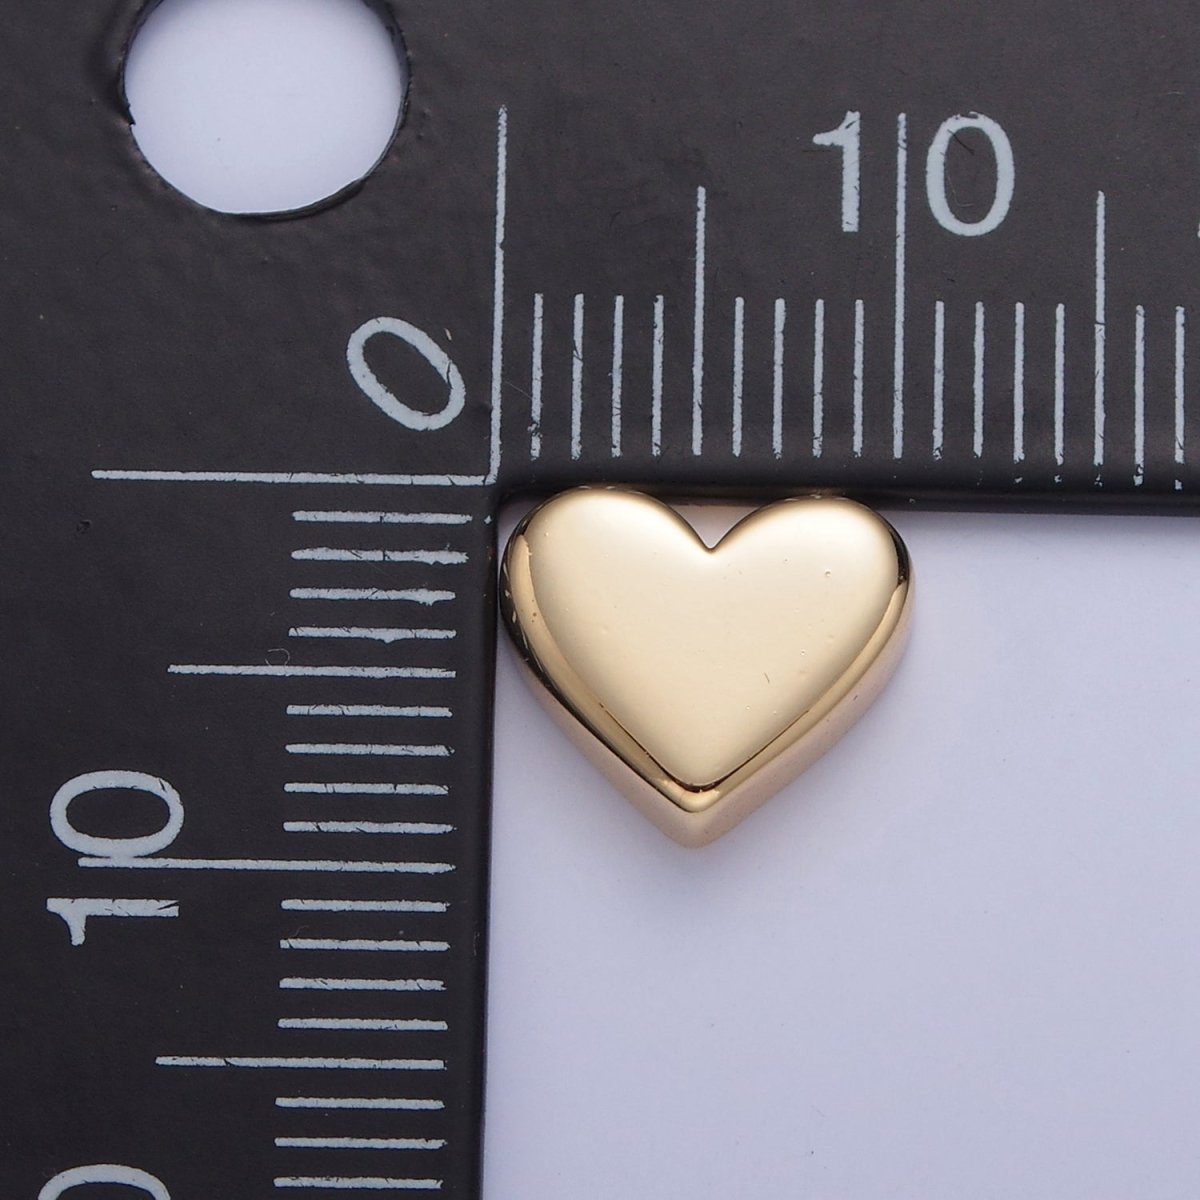 Dainty Gold Filled Heart Bead Spacer for Bracelet Necklace W-852 - DLUXCA